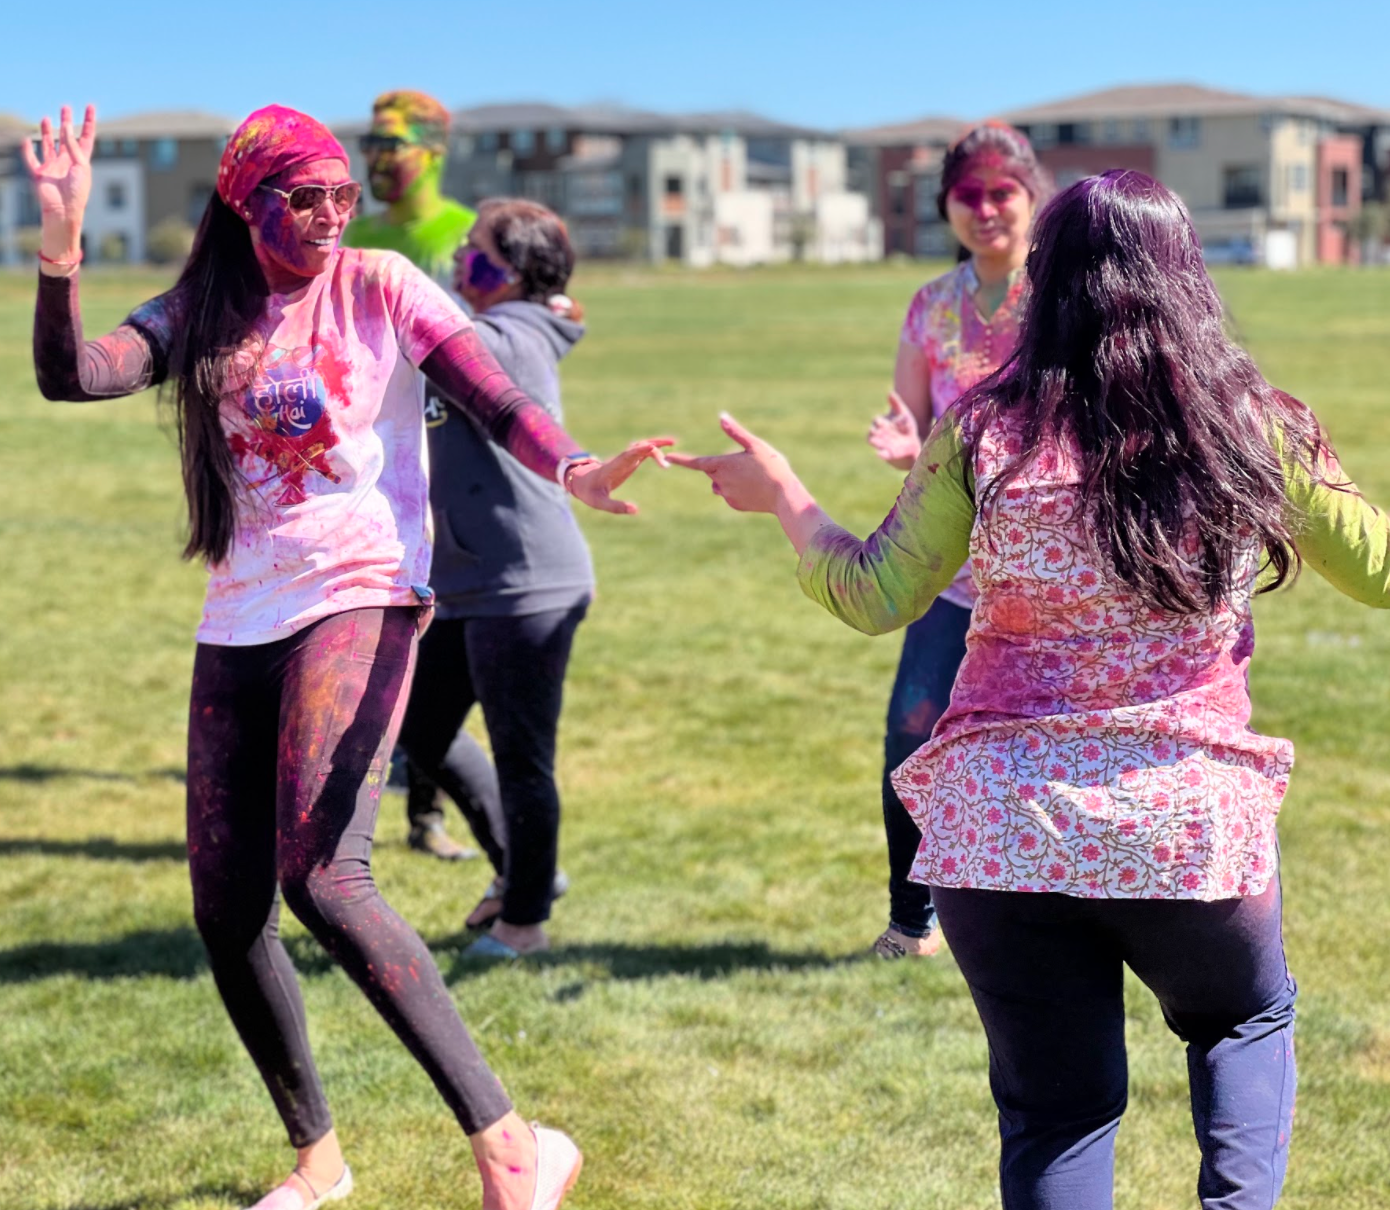 Indian+communities+celebrate+Holi%2C+the+Festival+of+Colors